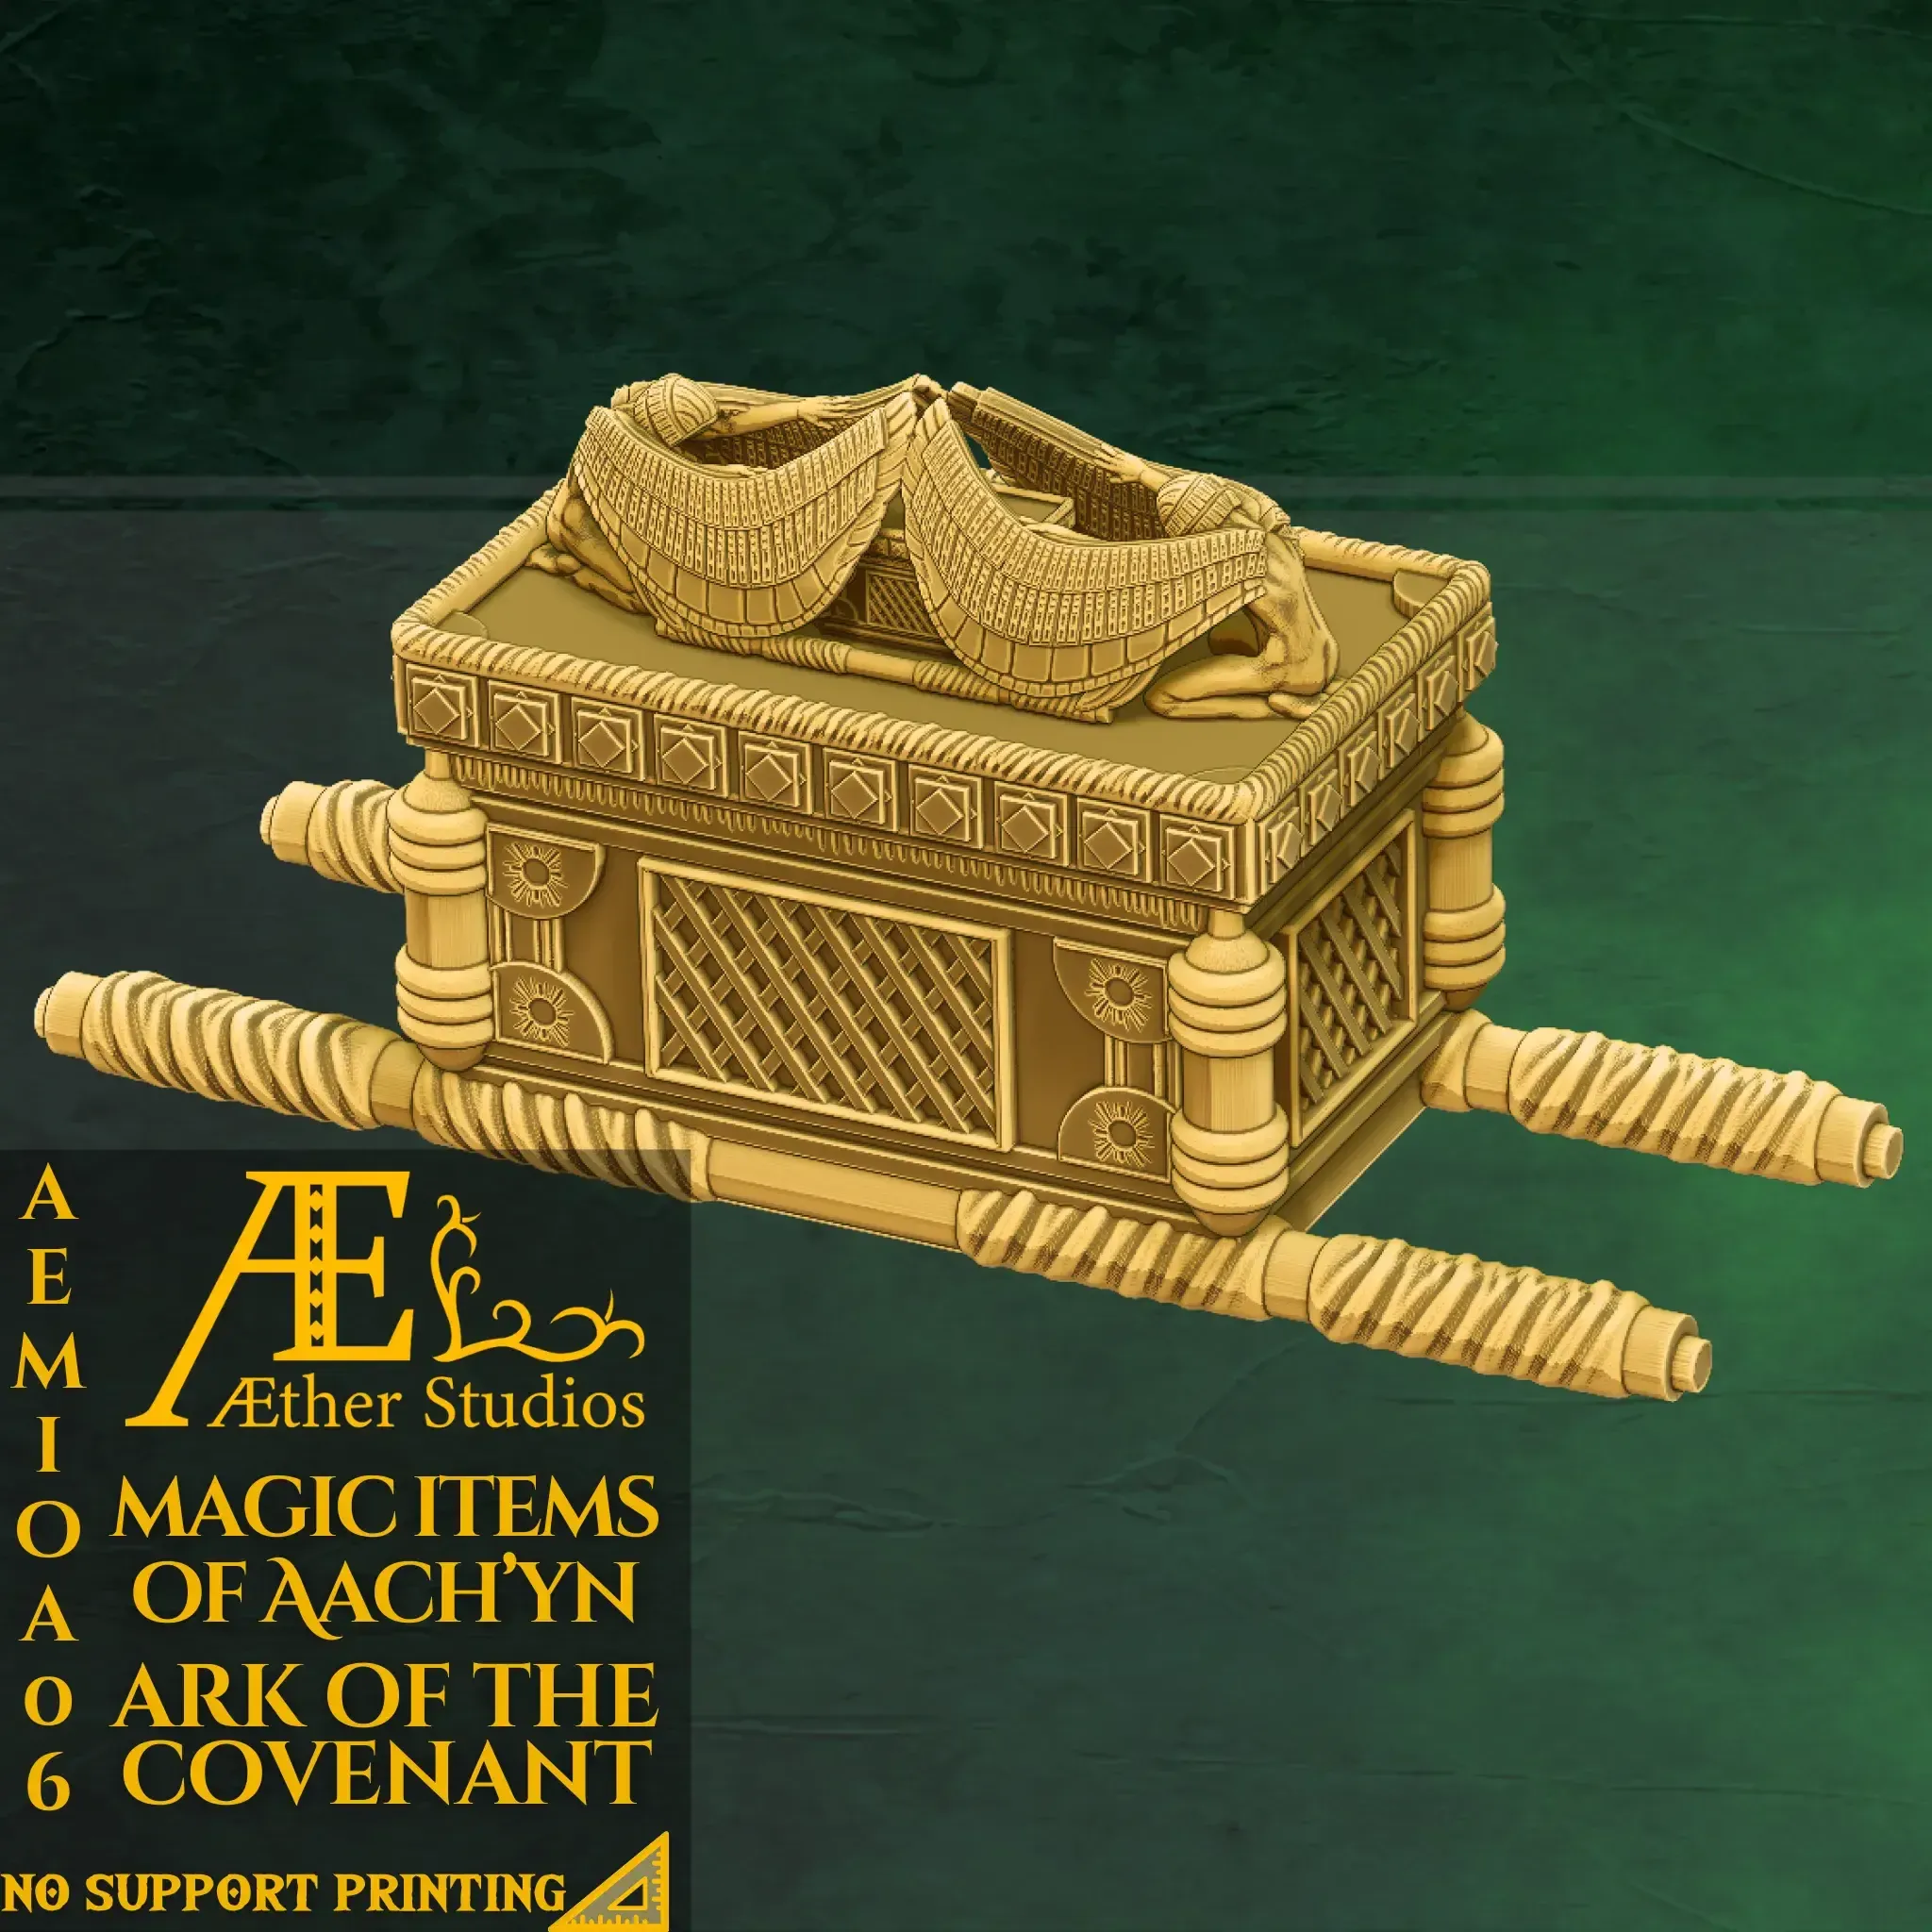 AEMIOA06 - Magic Items of Aach’yn: The Ark of the Covenant